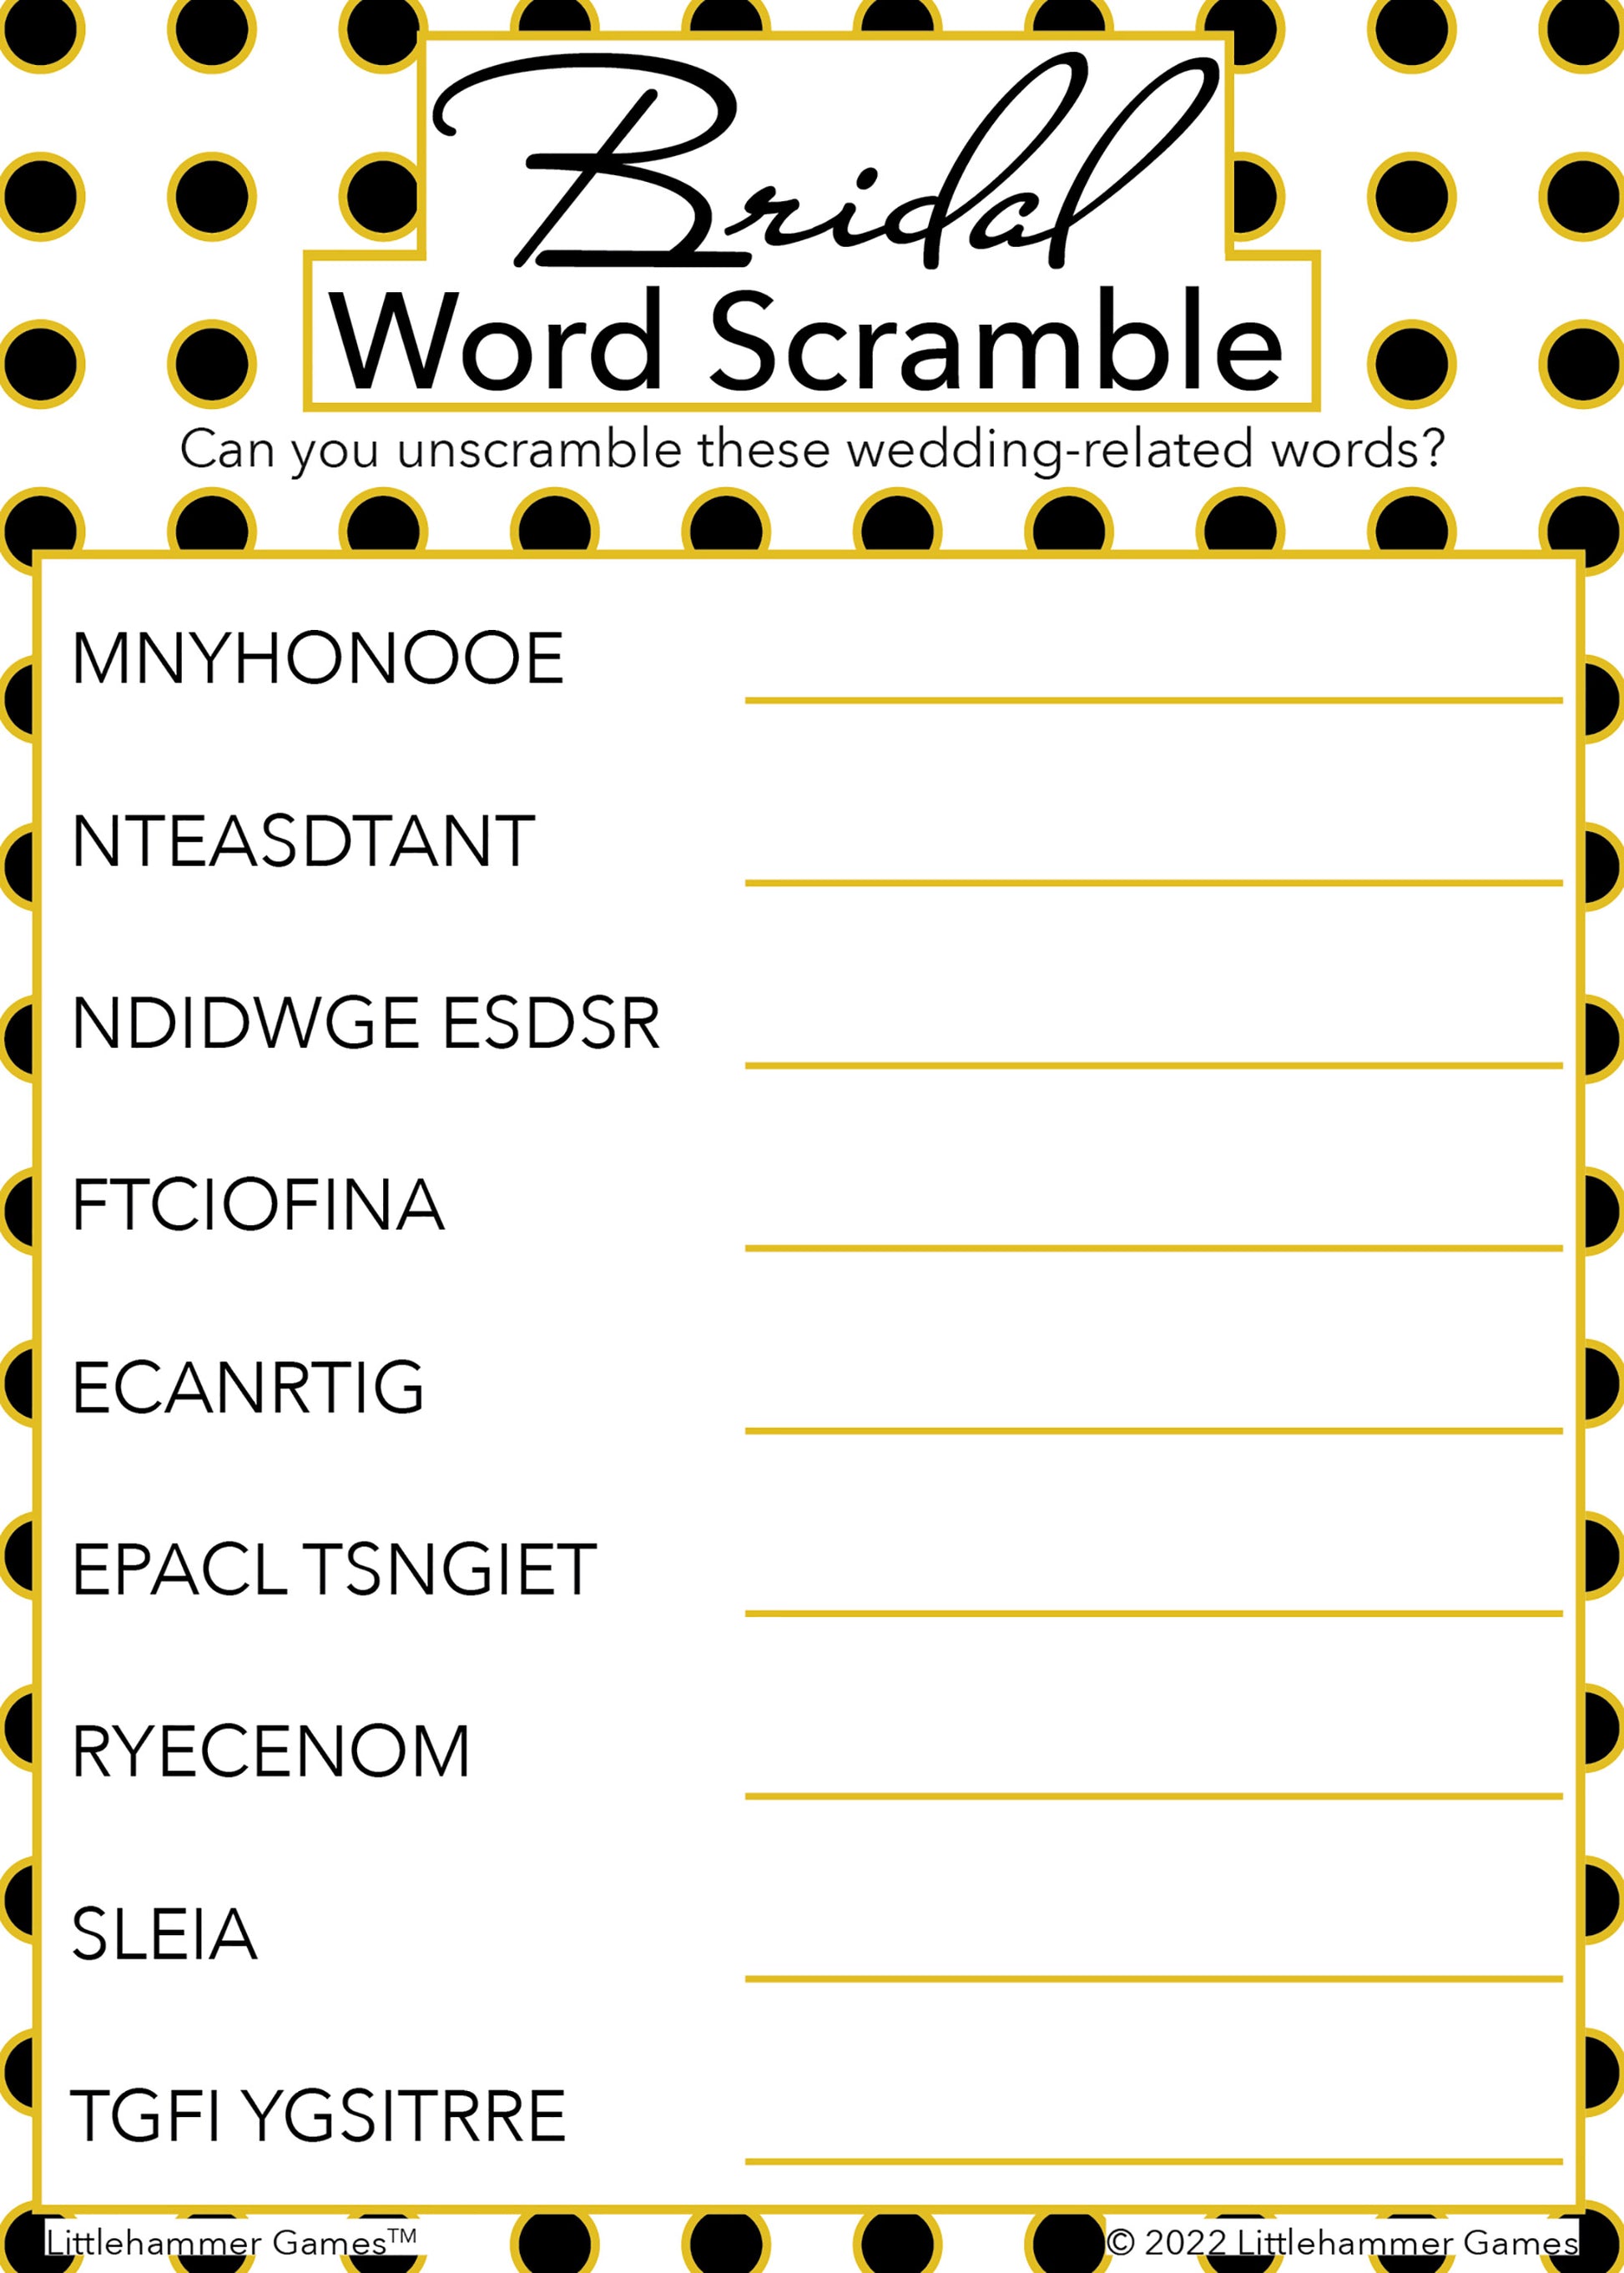 Bridal Word Scramble game card with a black and gold polka dot background